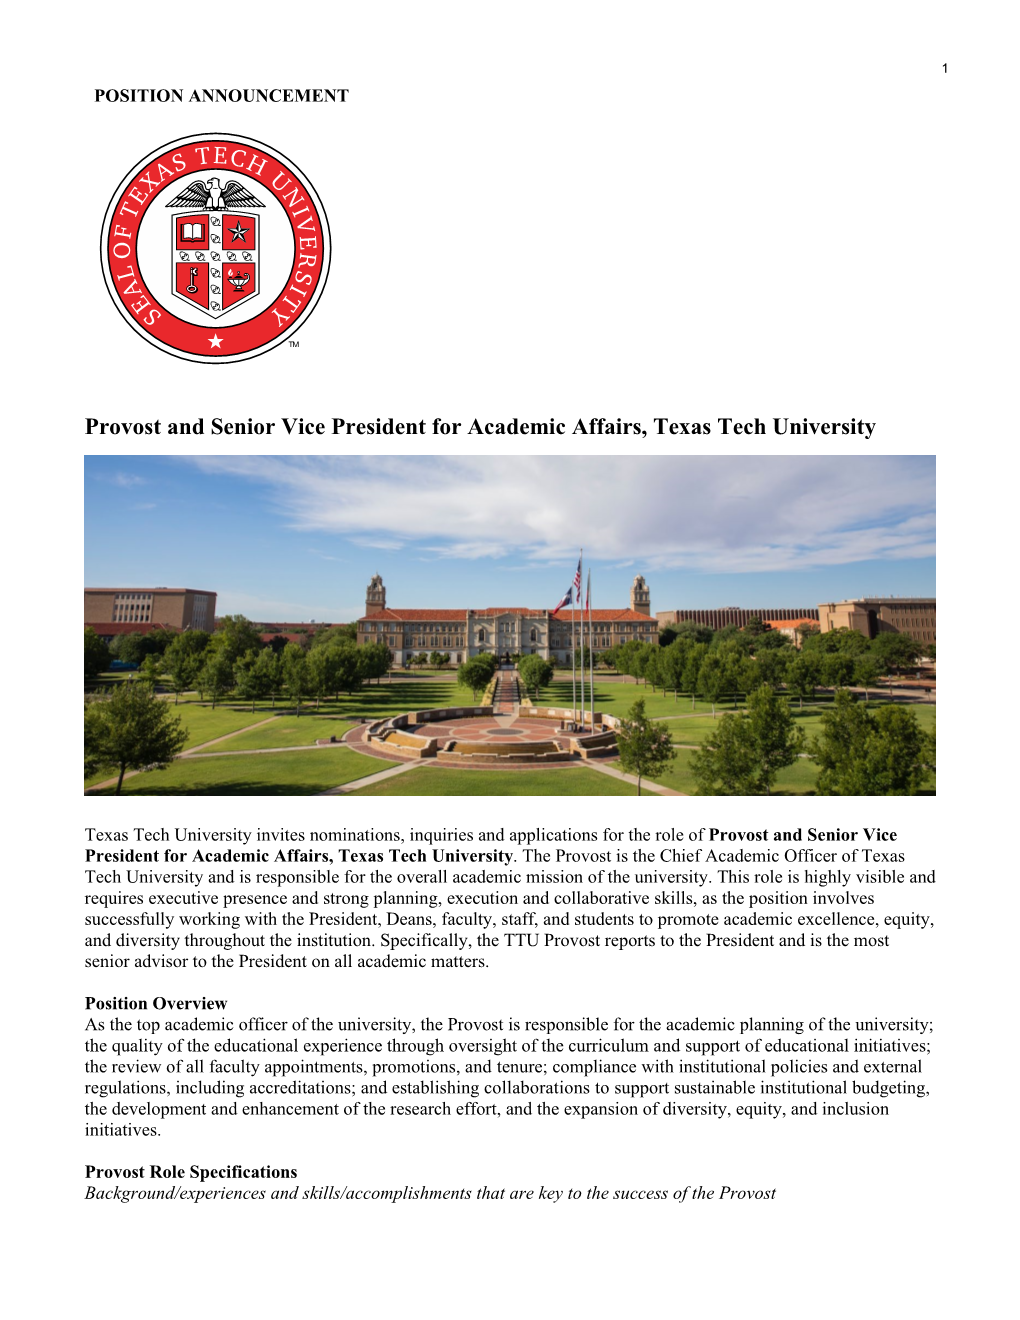 Provost and Senior Vice President for Academic Affairs, Texas Tech University